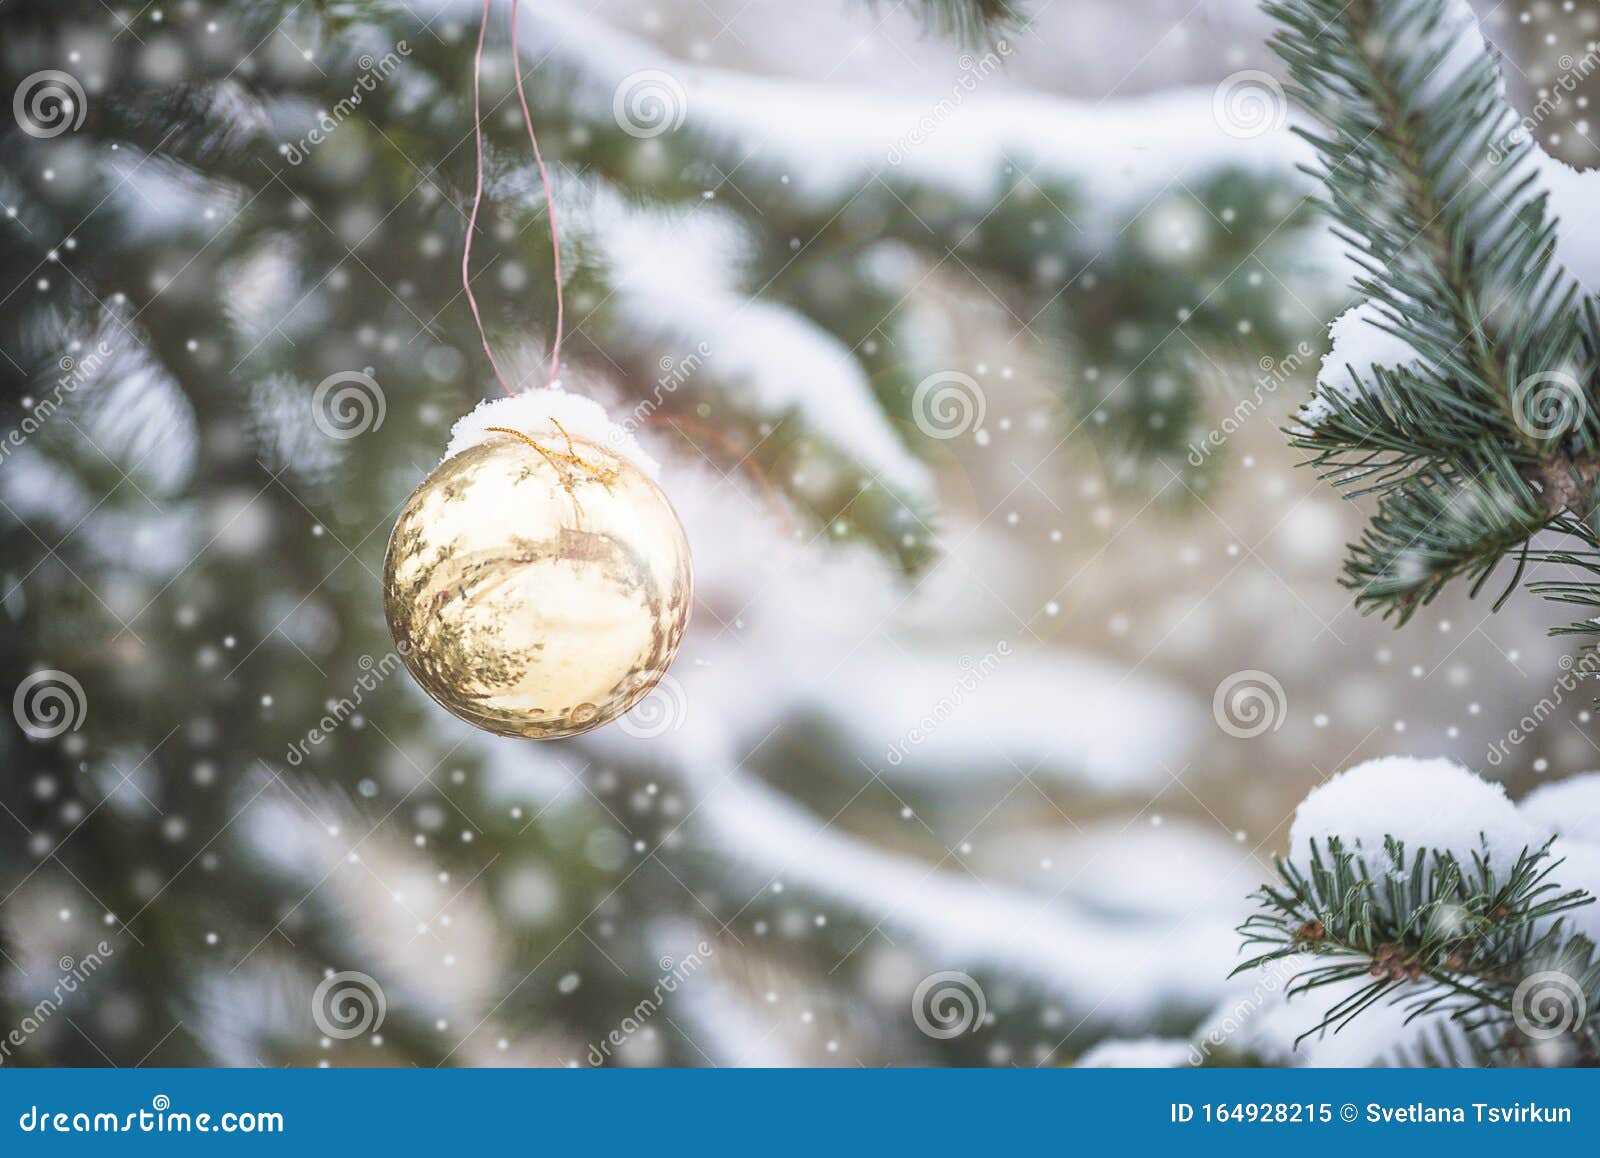 Beautiful Christmas Holiday Landscape with One Christmas Decoration on ...